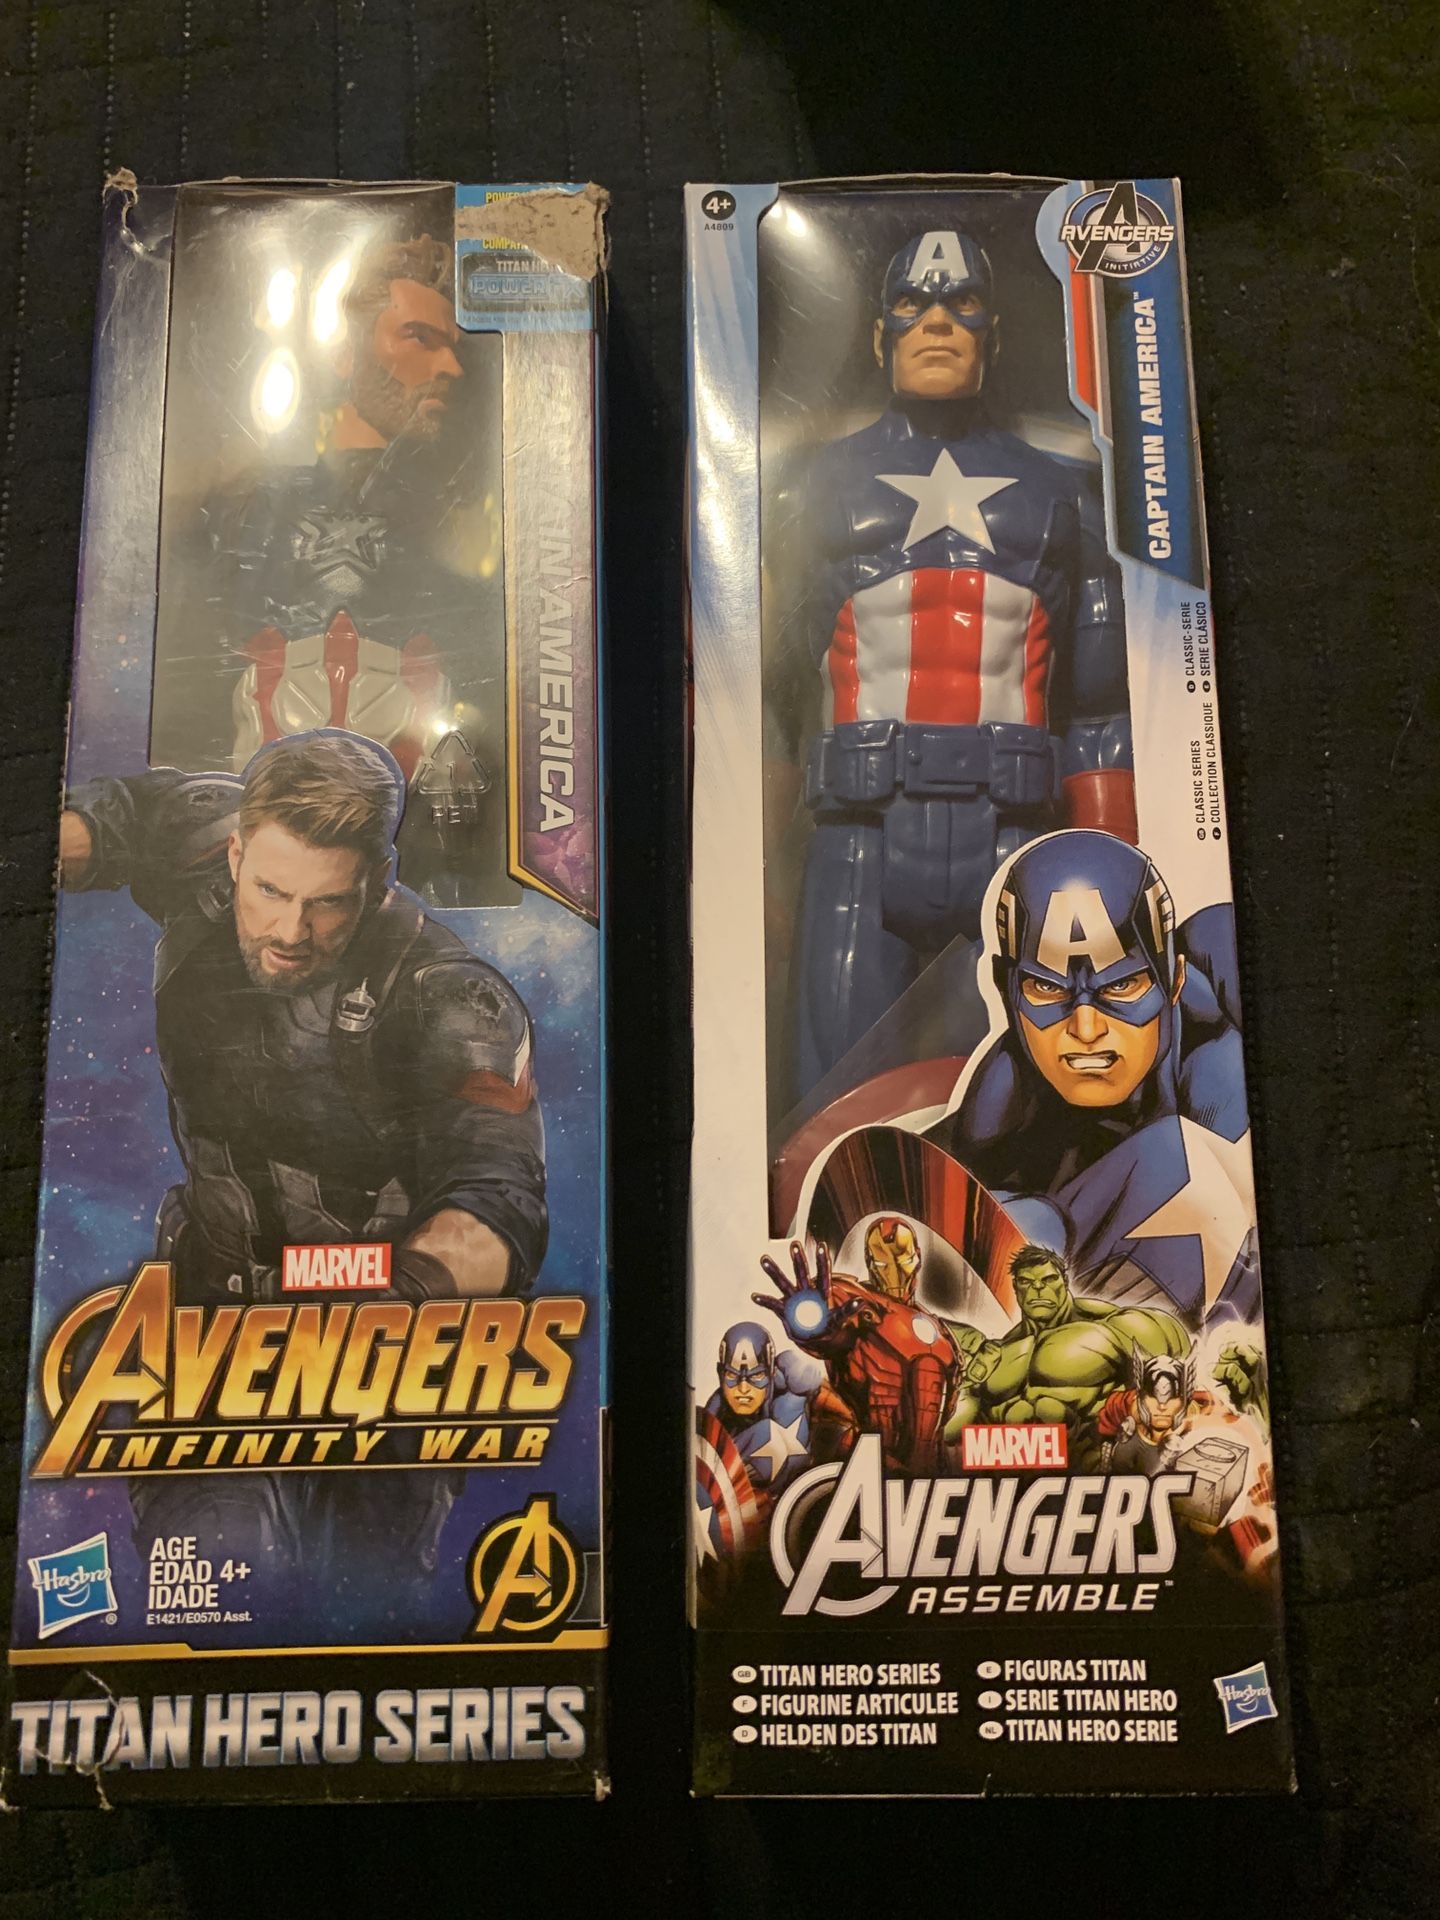 Captain America Iron man and more action figures